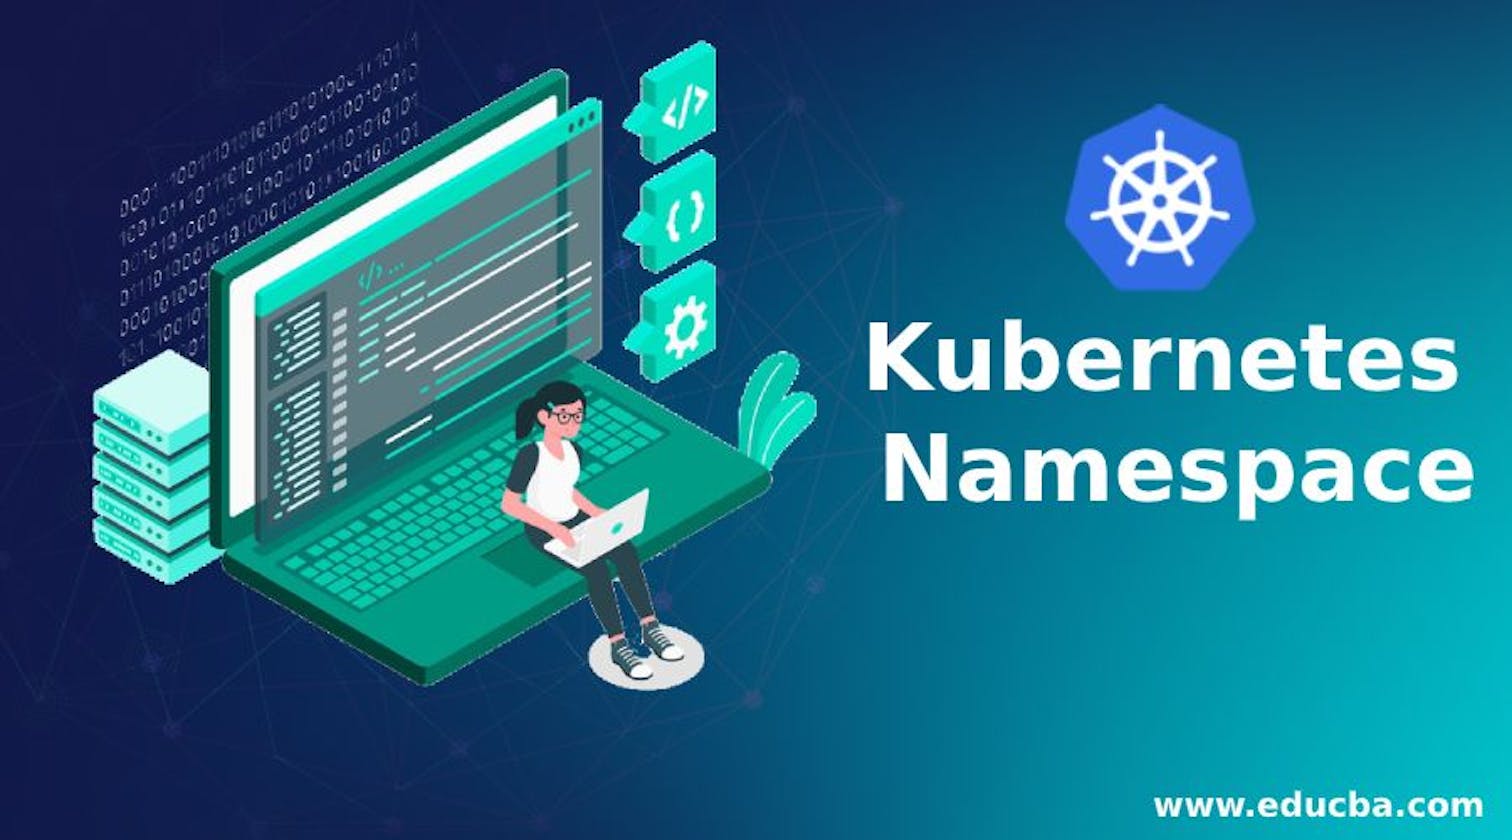 Day 33 - Working with Namespaces and Services in Kubernetes